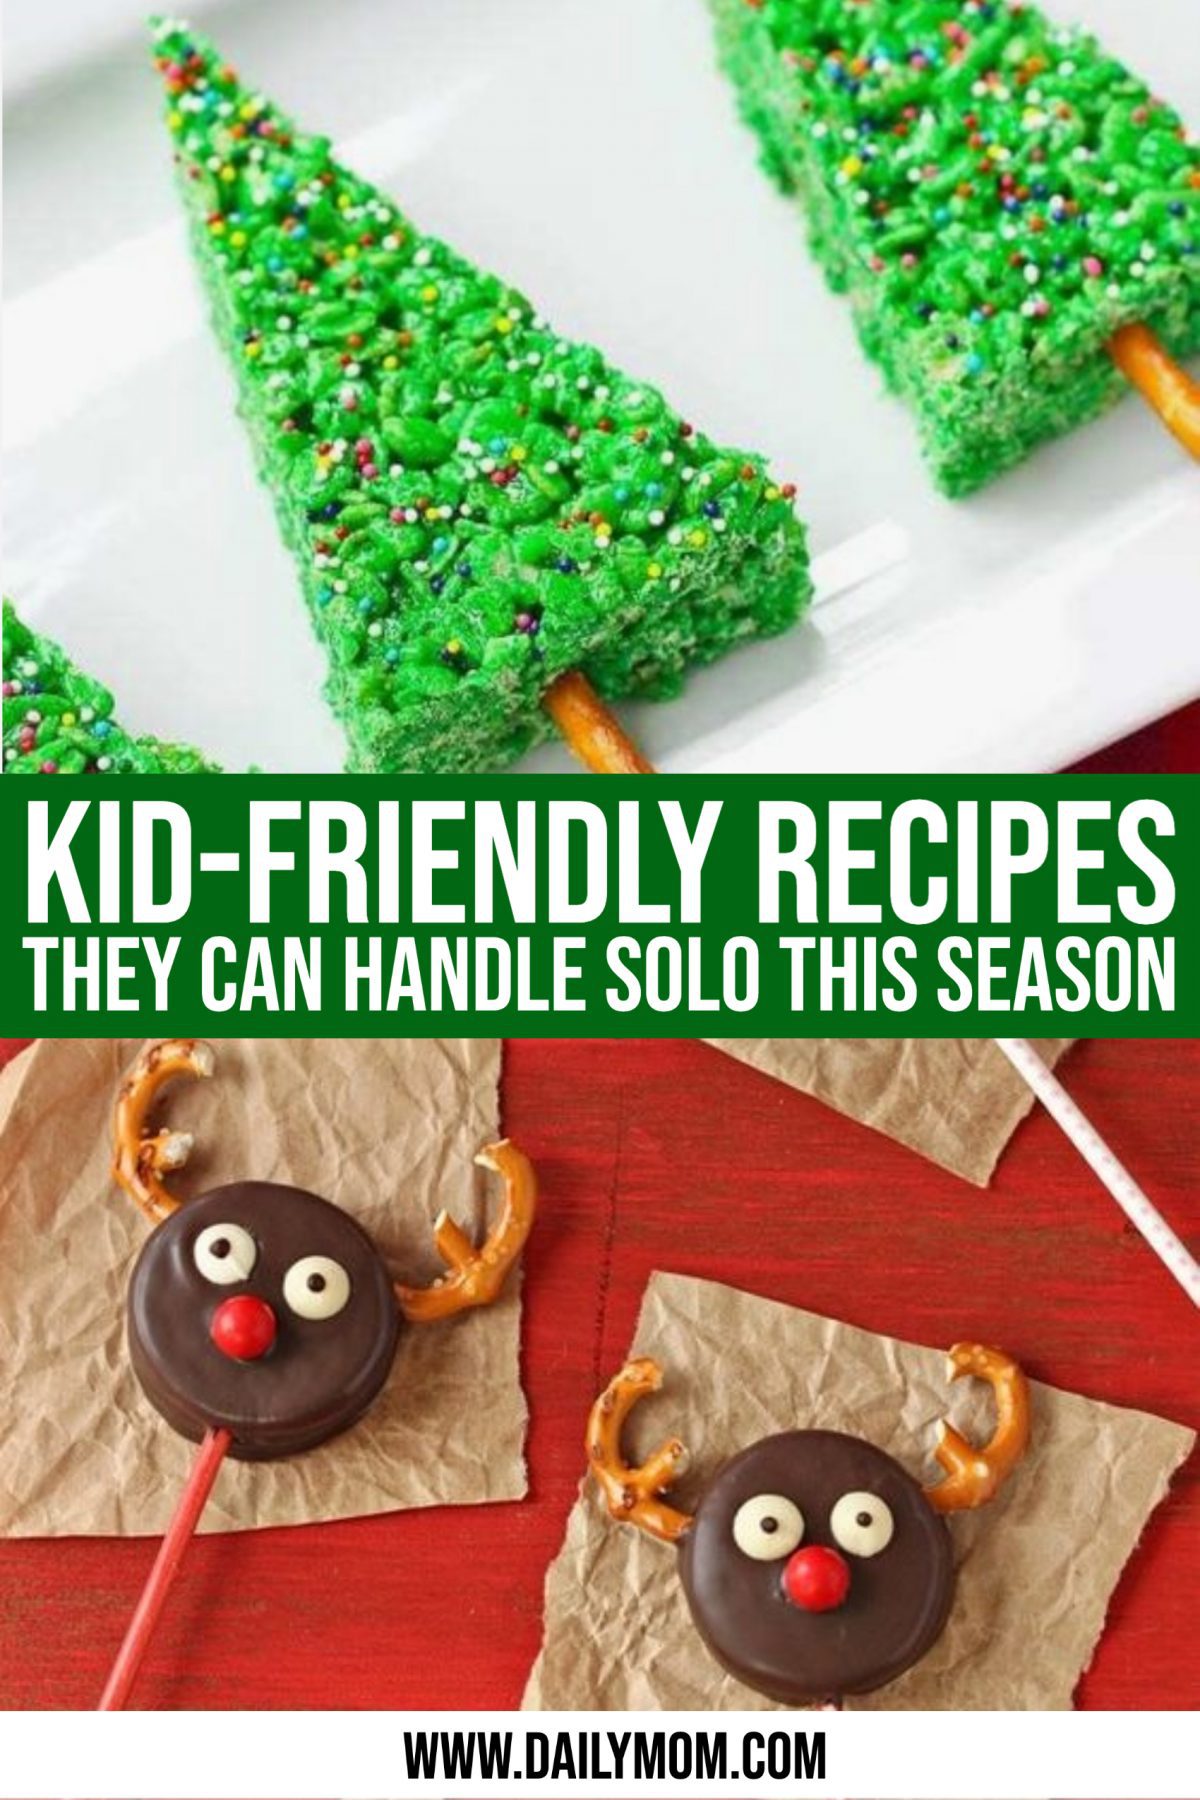 6 Cheerful Kid-friendly Recipes They Can Handle Solo This Season